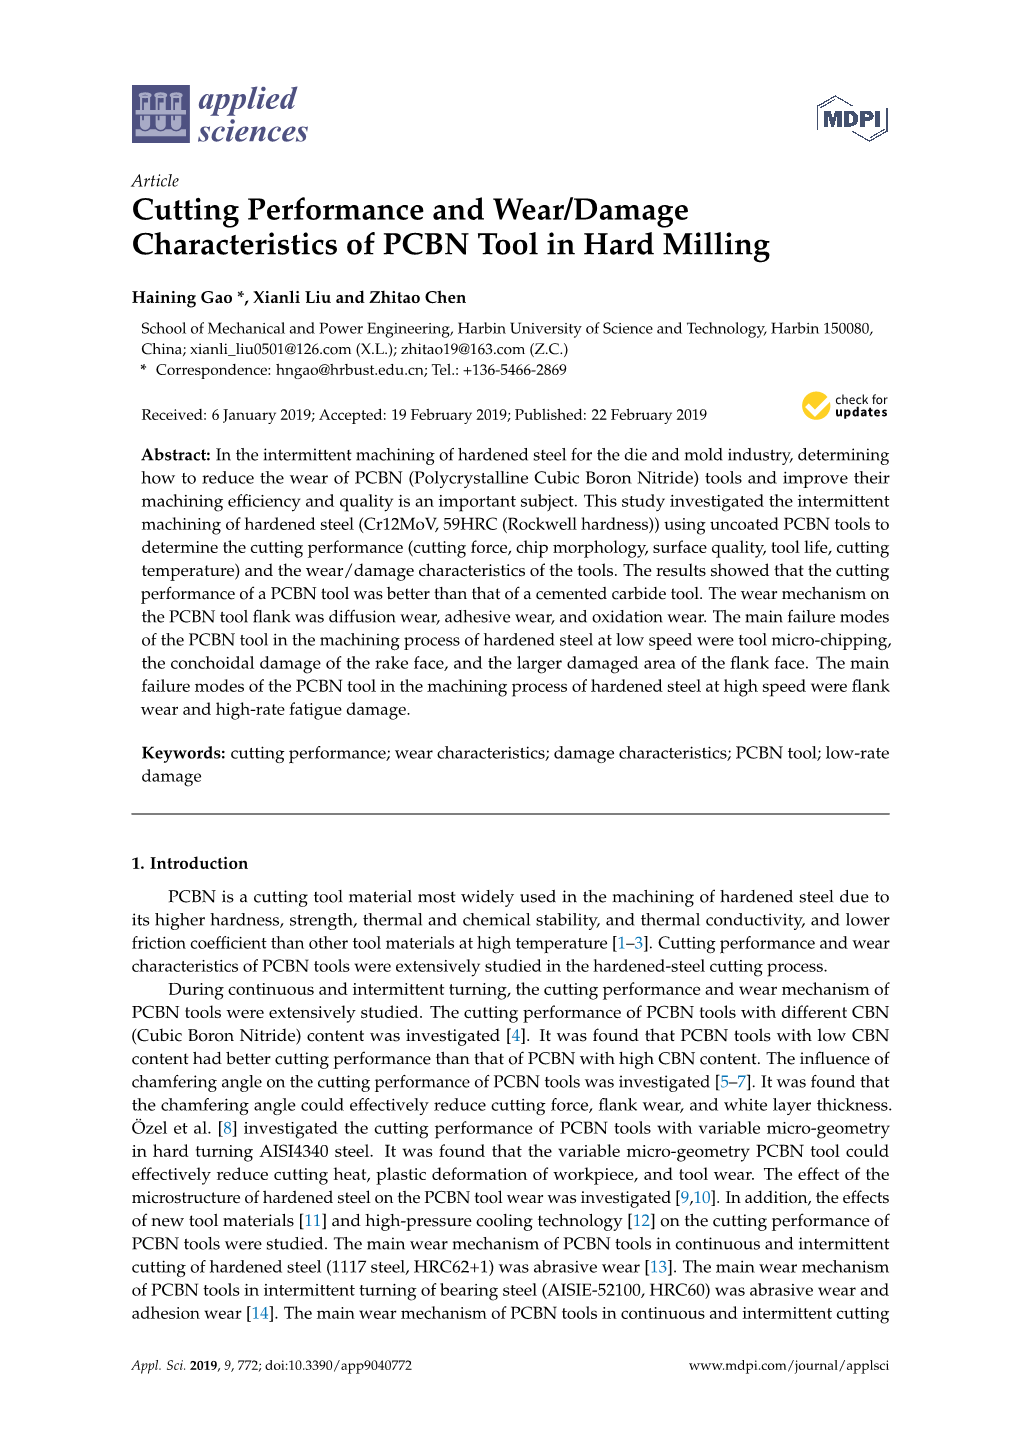 Cutting Performance and Wear/Damage Characteristics of PCBN Tool in Hard Milling